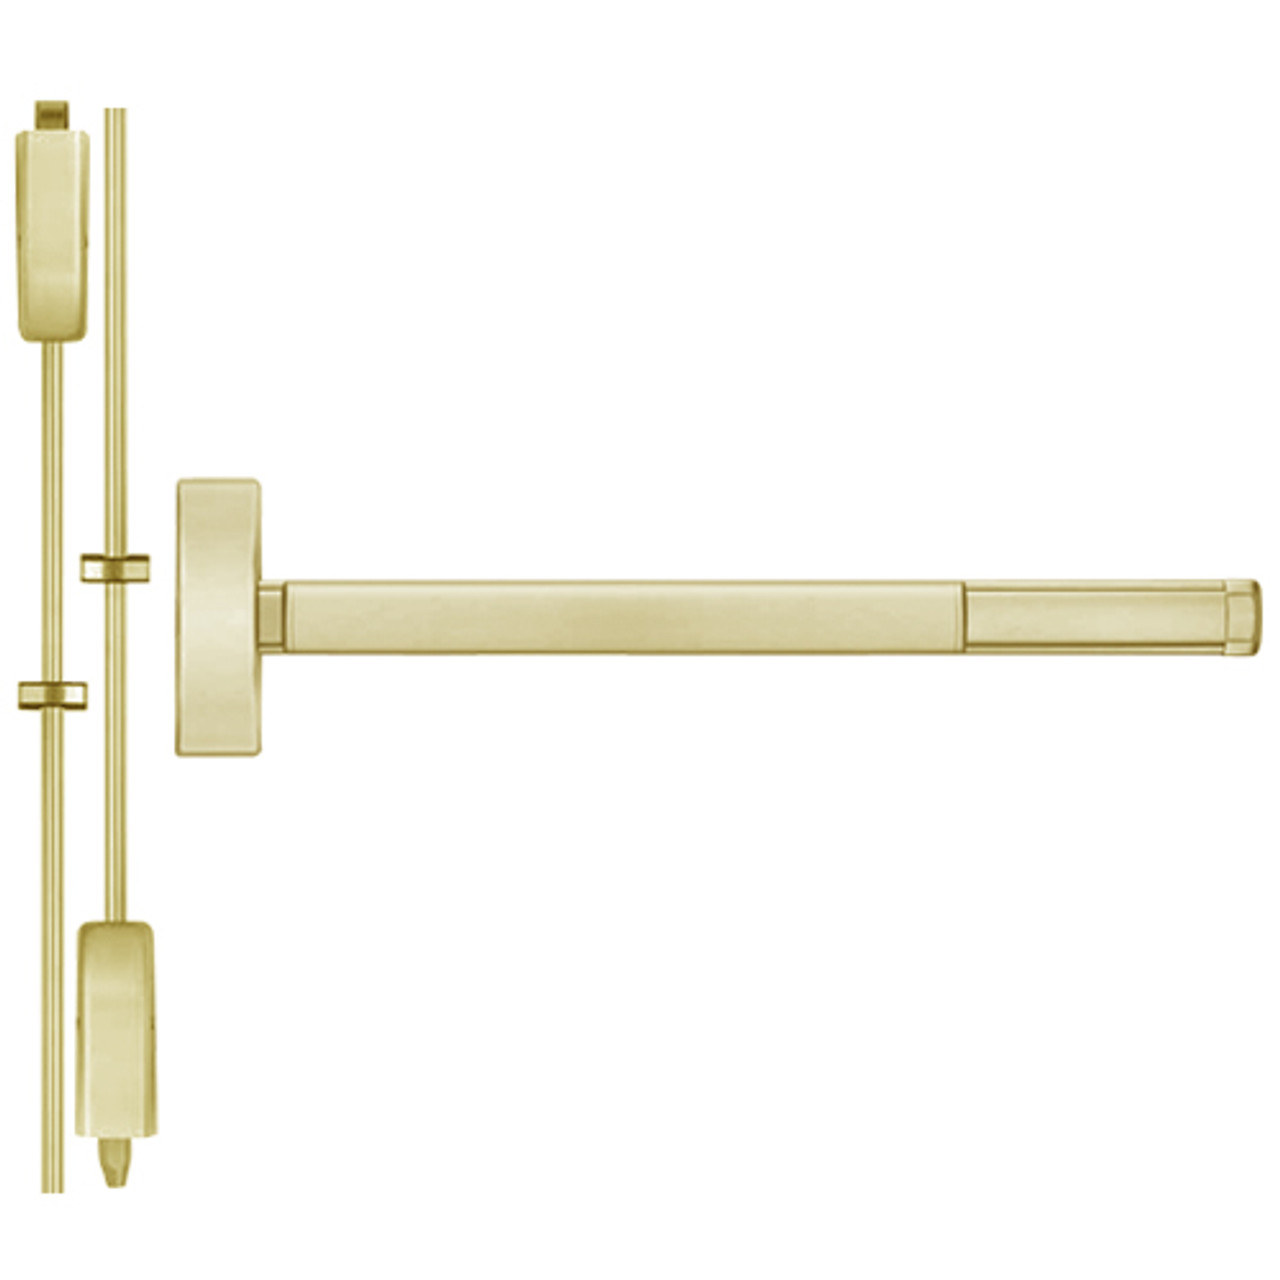 ELR2202-606-36 PHI 2200 Series Non Fire Rated Apex Surface Vertical Rod Device with Electric Latch Retraction Prepped for Dummy Trim in Satin Brass Finish